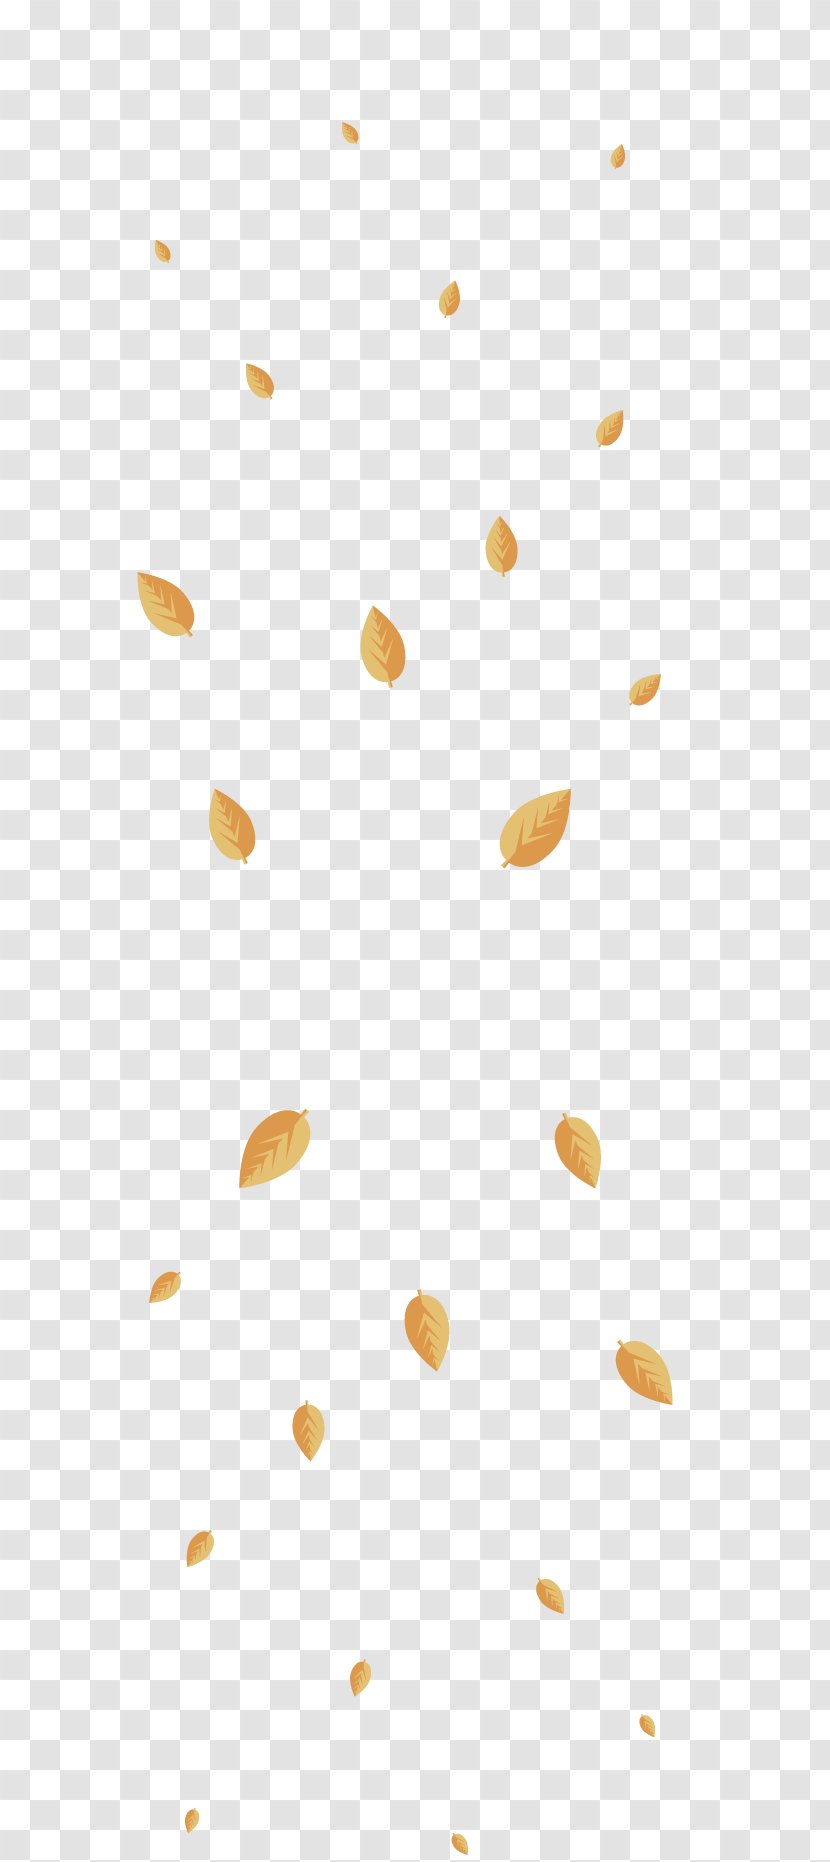 Autumn Leaf - Yellow - Floating Leaves Transparent PNG